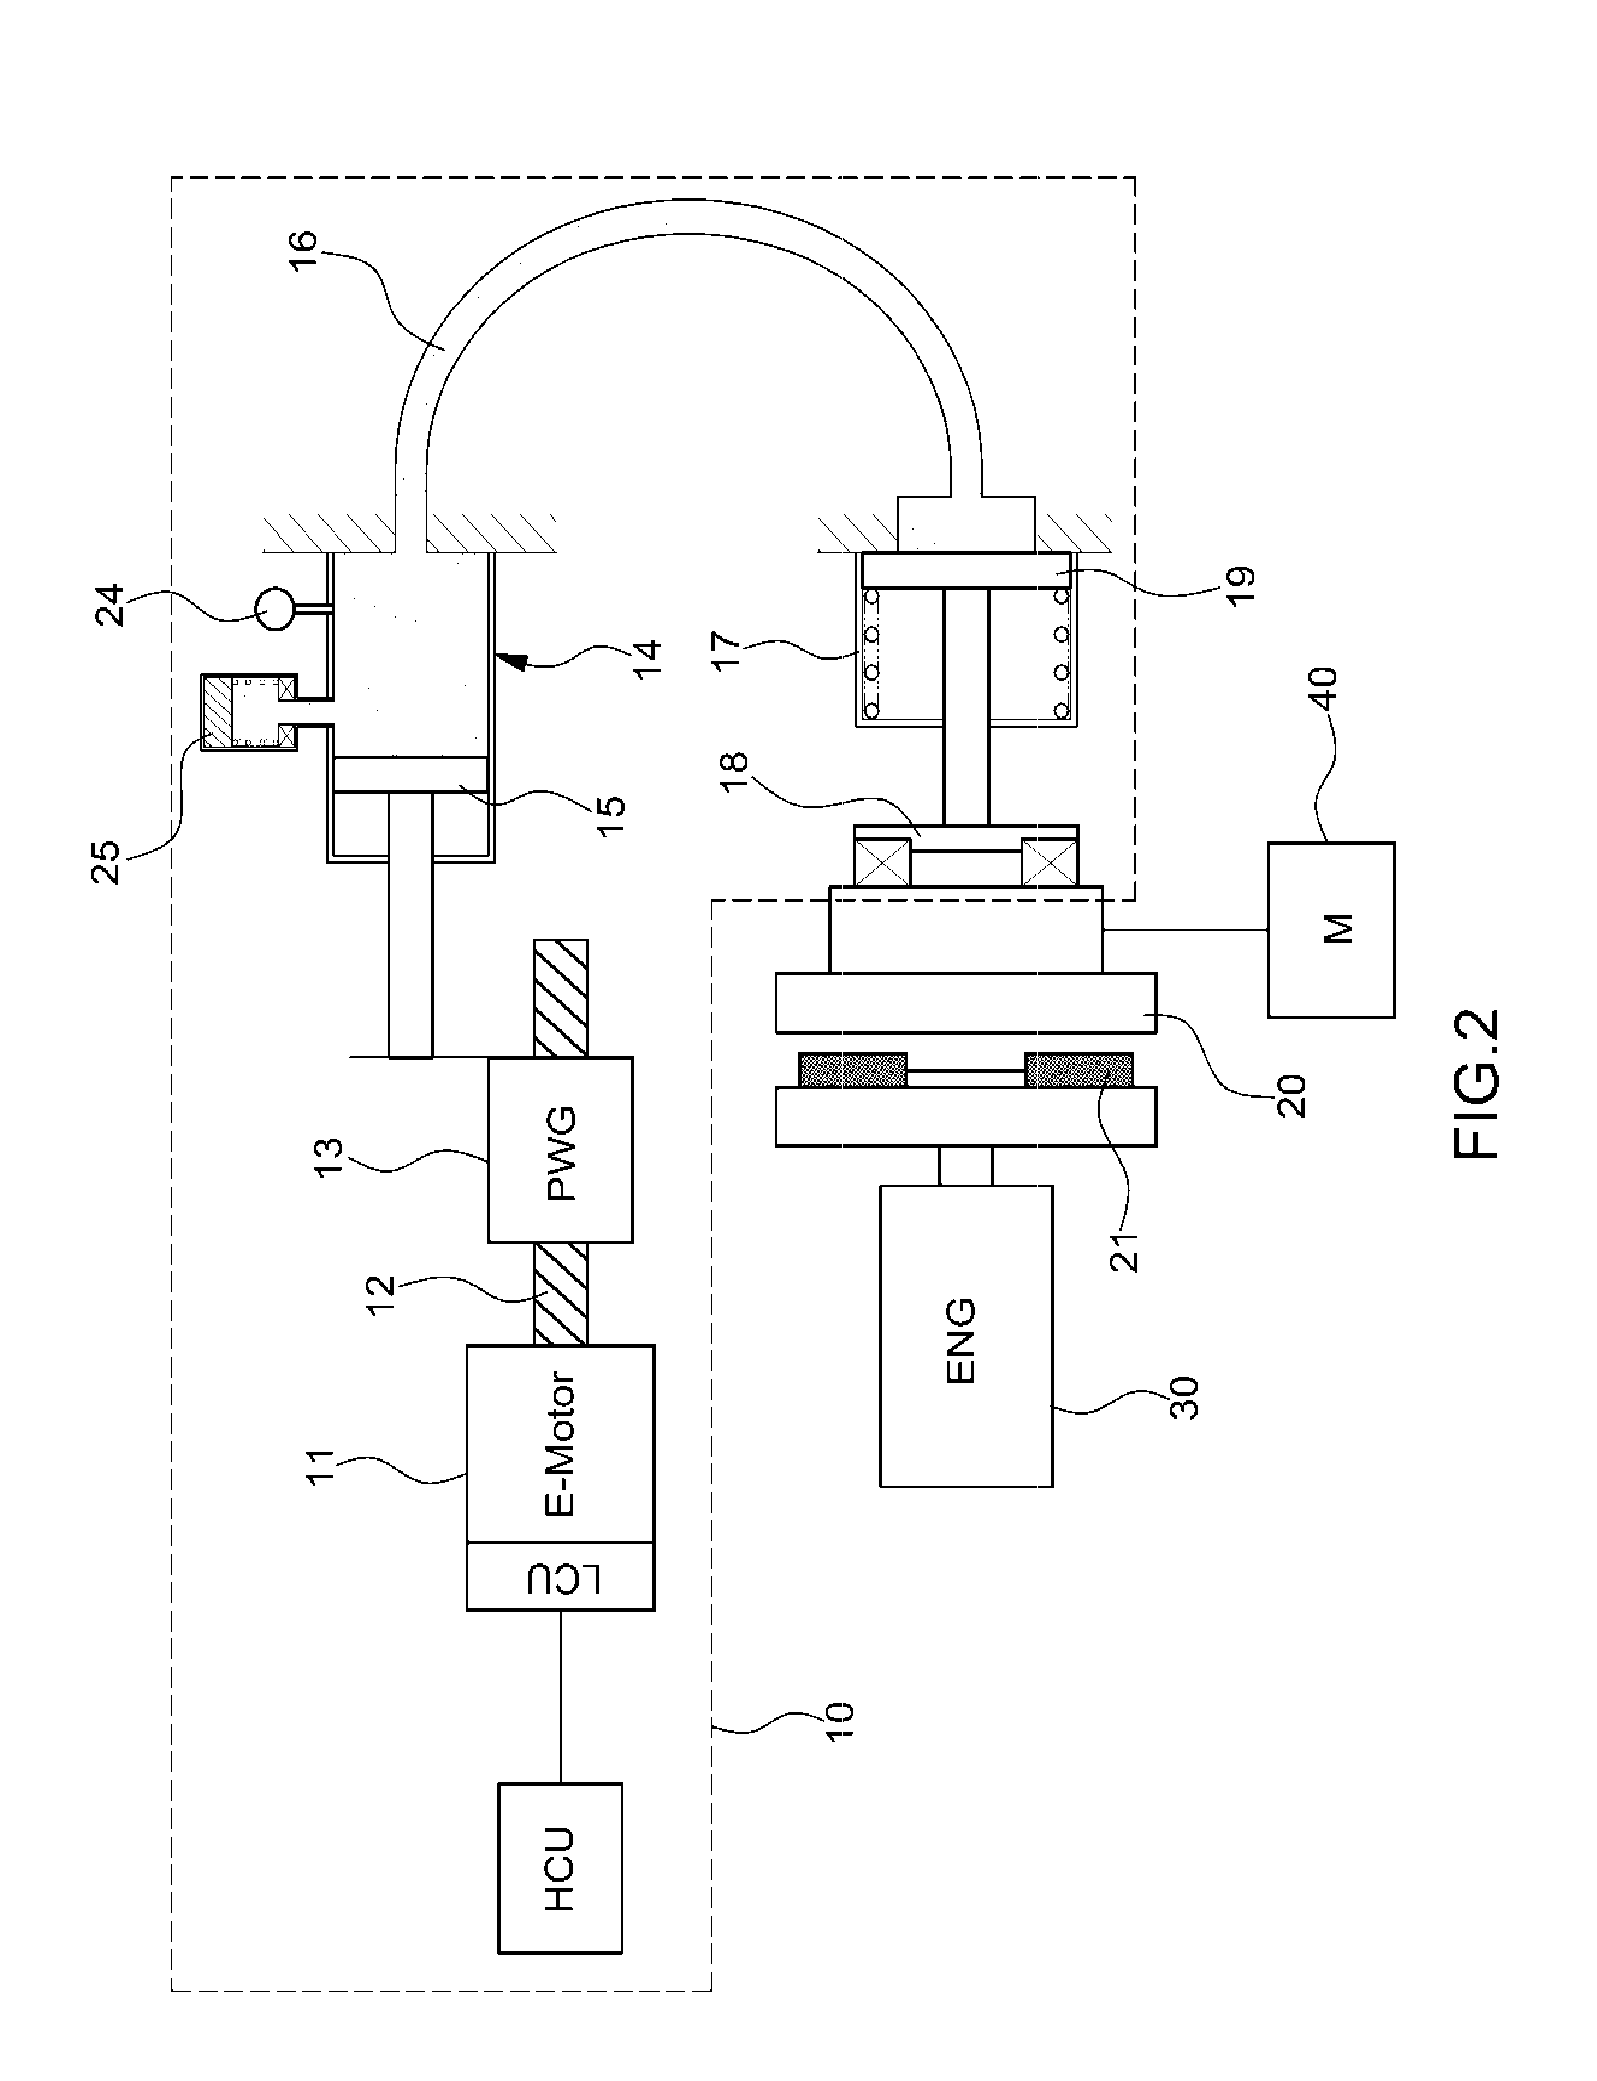 Fail-safe device and fail-safe method for engine clutch actuator for hybrid vehicle